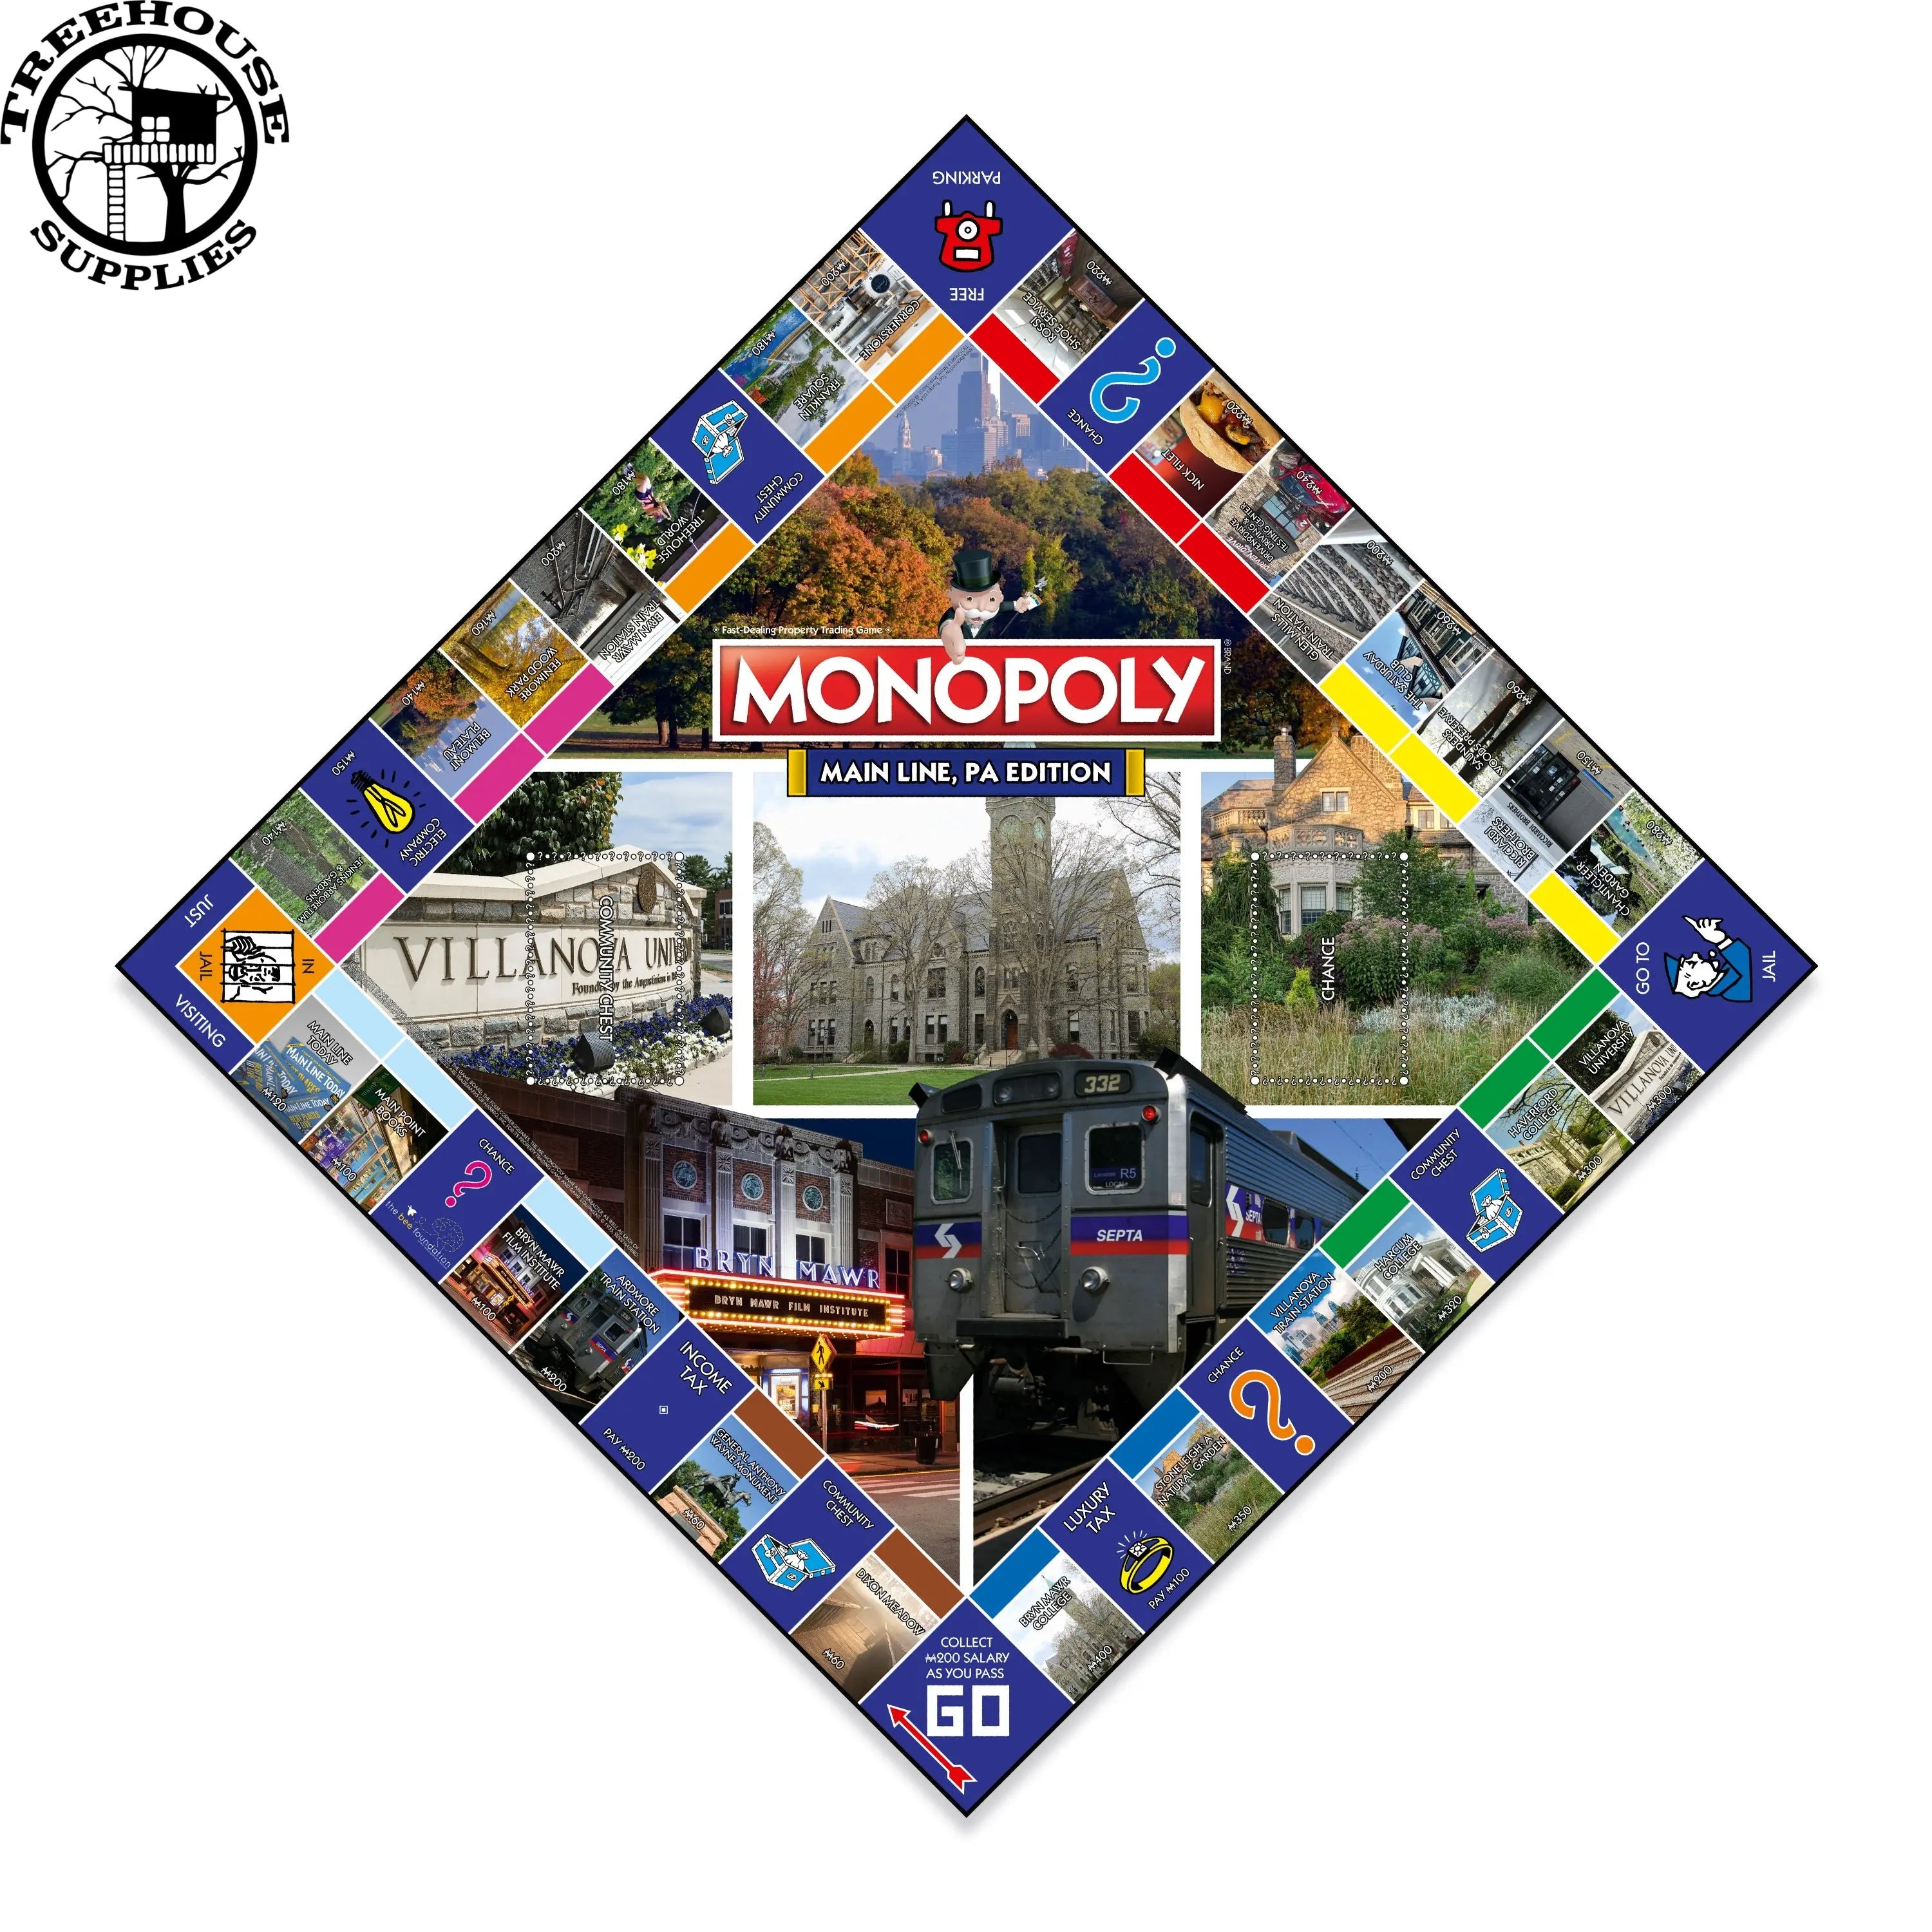 Treehouse Supplies MONOPOLY BOARD - MAINLINE PA EDITION 